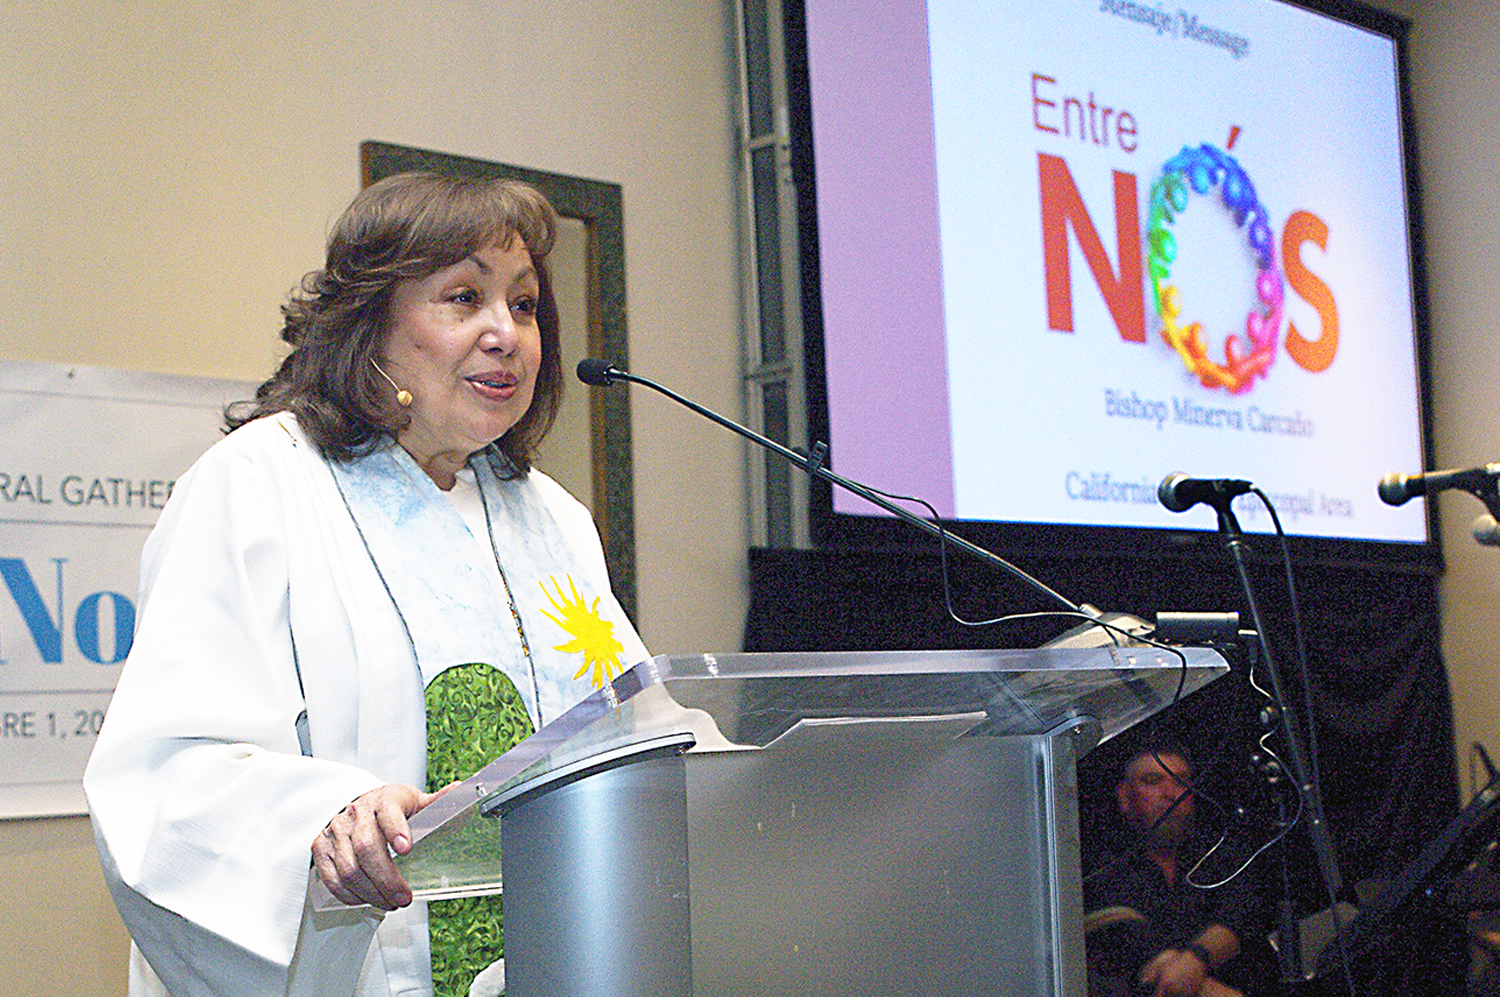 Bishop Minerva Carcaño leads opening worship at Entre Nos, a gathering of leaders of Hispanic/Latino ministry in The United Methodist Church, held Oct. 30-Nov. 1 in Phoenix. The event was the first in-person gathering of the group since 2019. Photo by the Rev. Gustavo Vasquez, UM News.